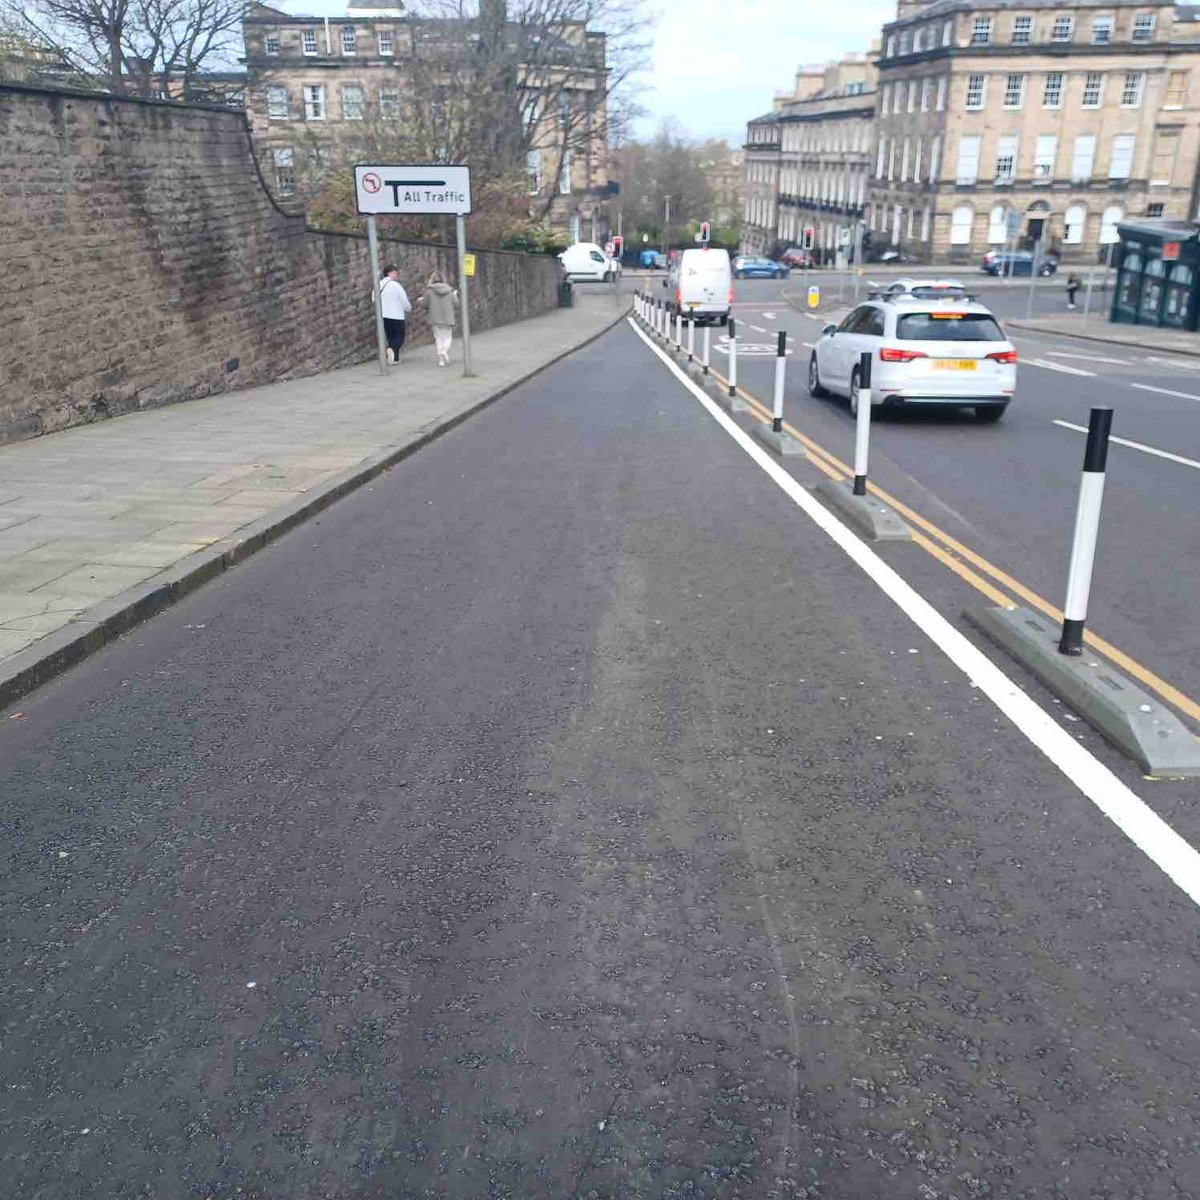 BEWARE #EDINBURGH #CYCLISTS Anyone cycling south from Charlotte Square towards Albyn Place should look out for this strange road layout, especially after dark as the armadillos will get you if you try and exit.